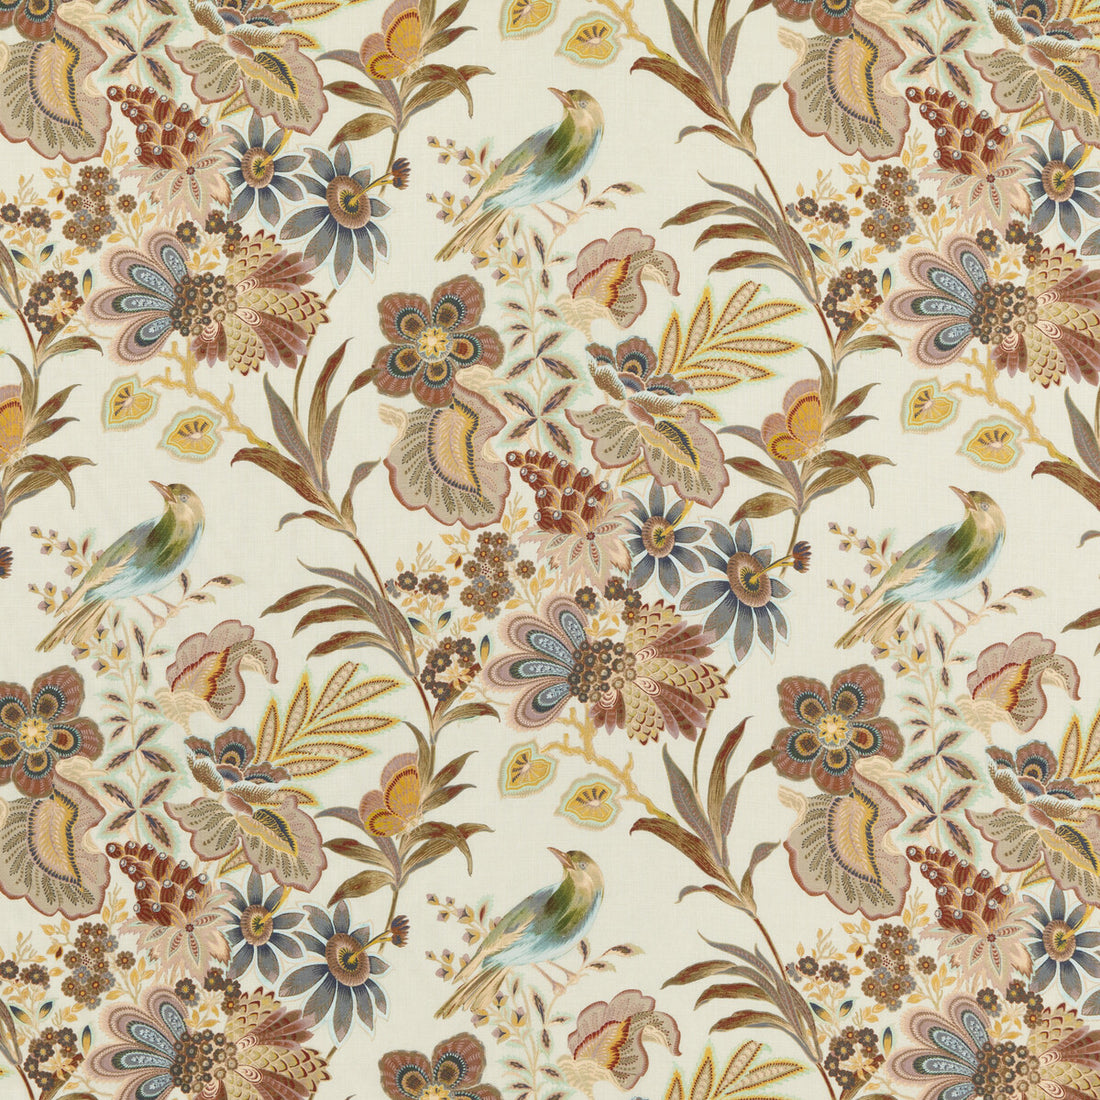 Artist Garden fabric in spice color - pattern FD303.T30.0 - by Mulberry in the Modern Country II collection